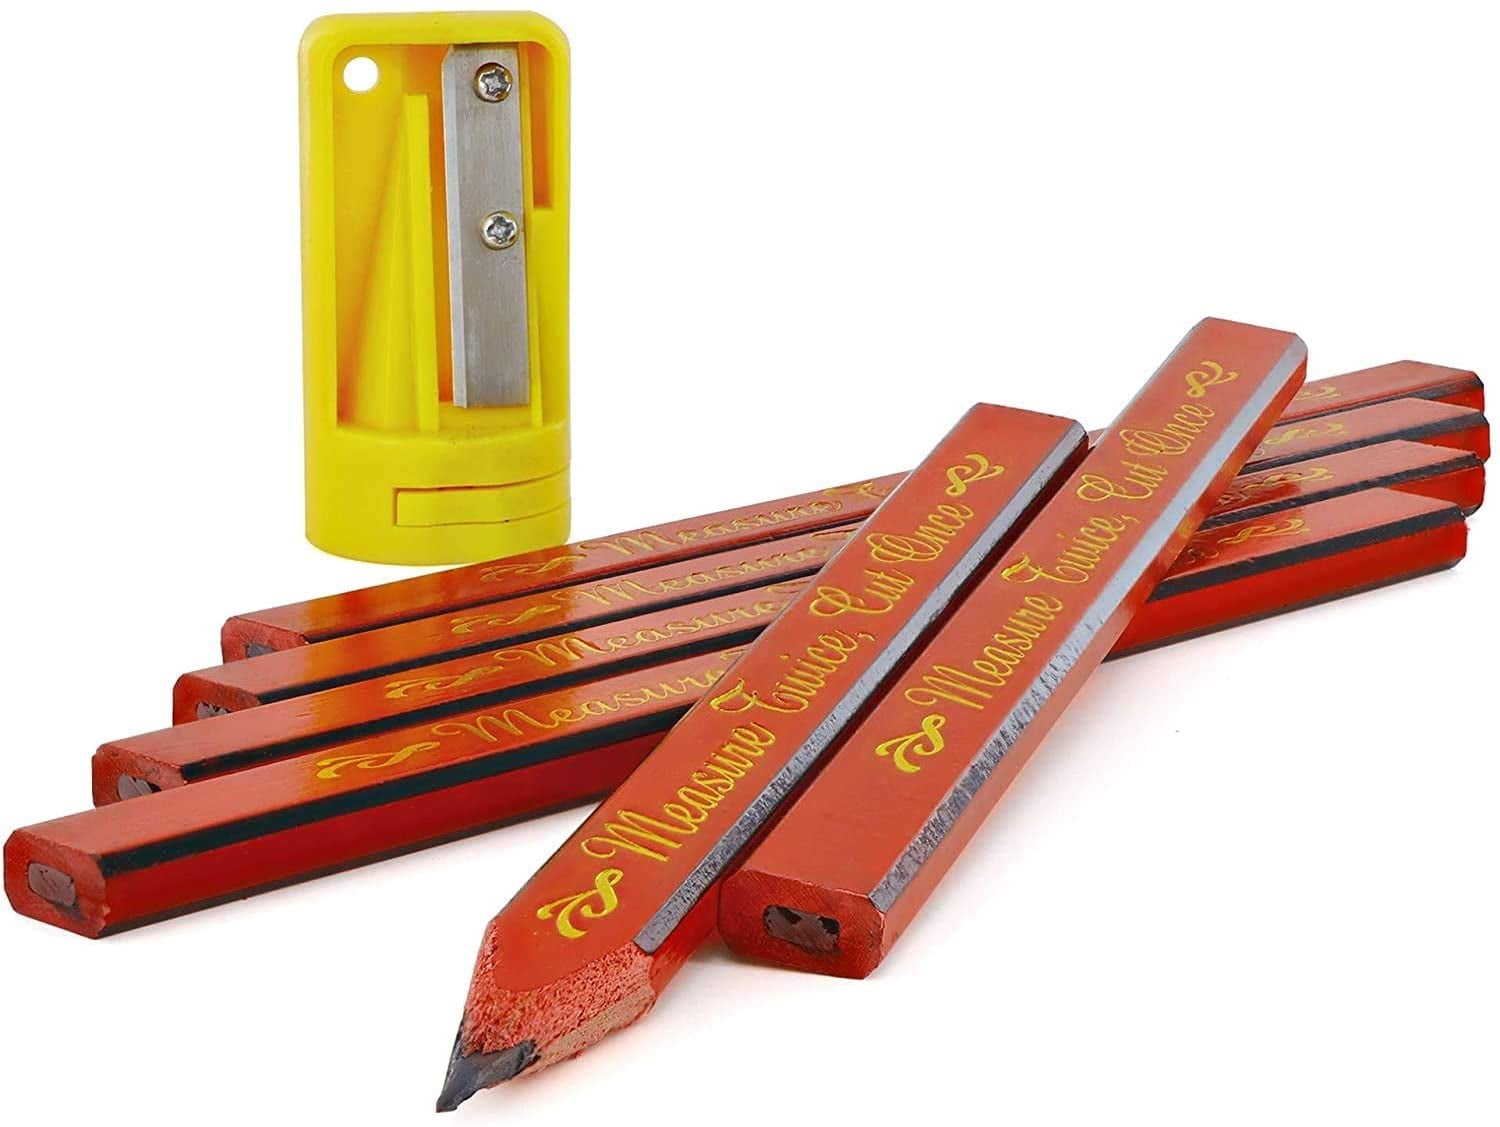 Ram Pro Flat Wood Carpenter Pencil & Sharpener Set Woodwork Pencil  Sharpening Tool Narrow Shaver Cutter Comes in Blue, Yellow and Red Color (3  Per